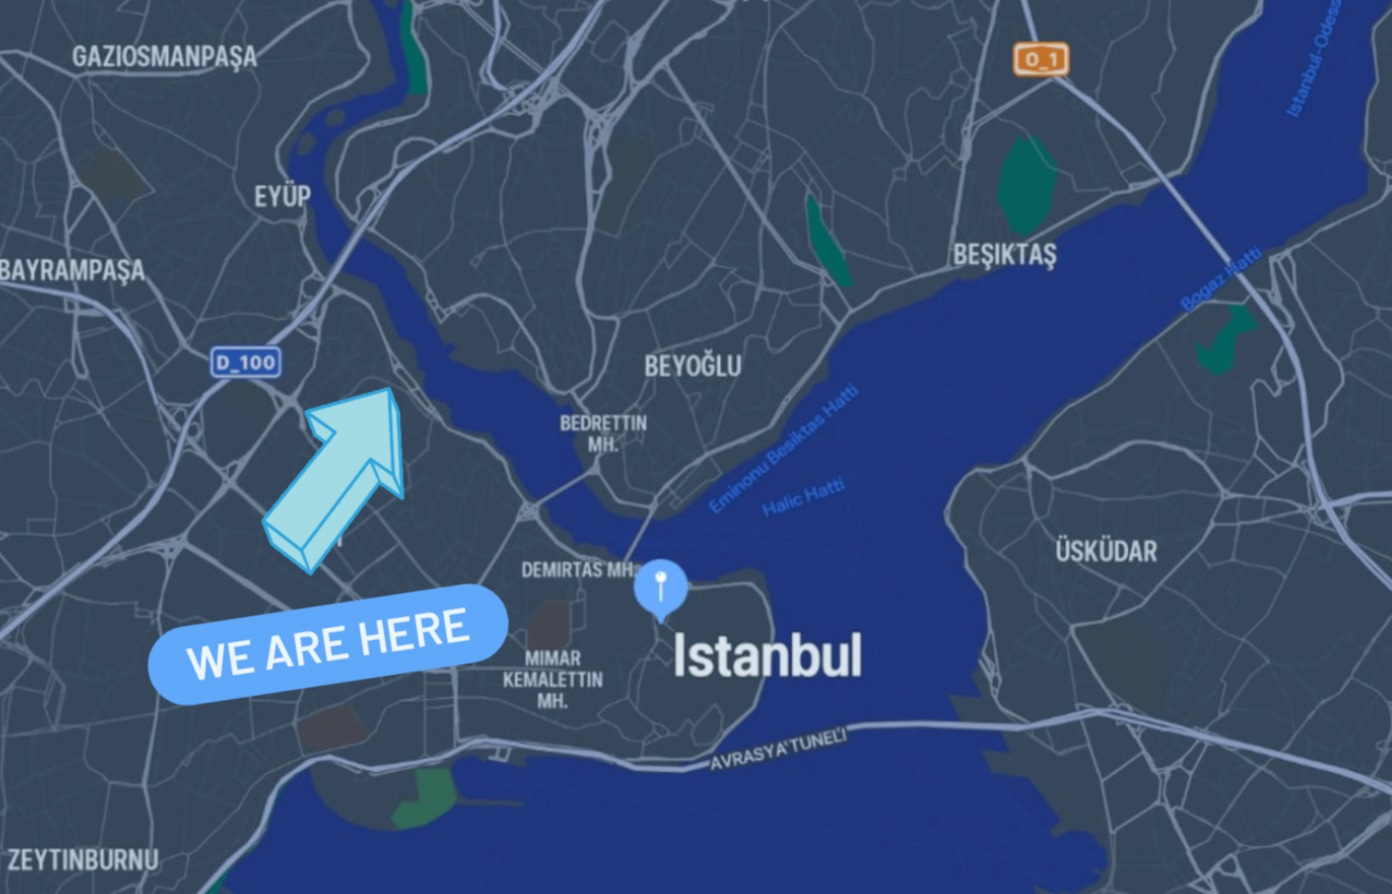 A map of Istanbul showing our location.